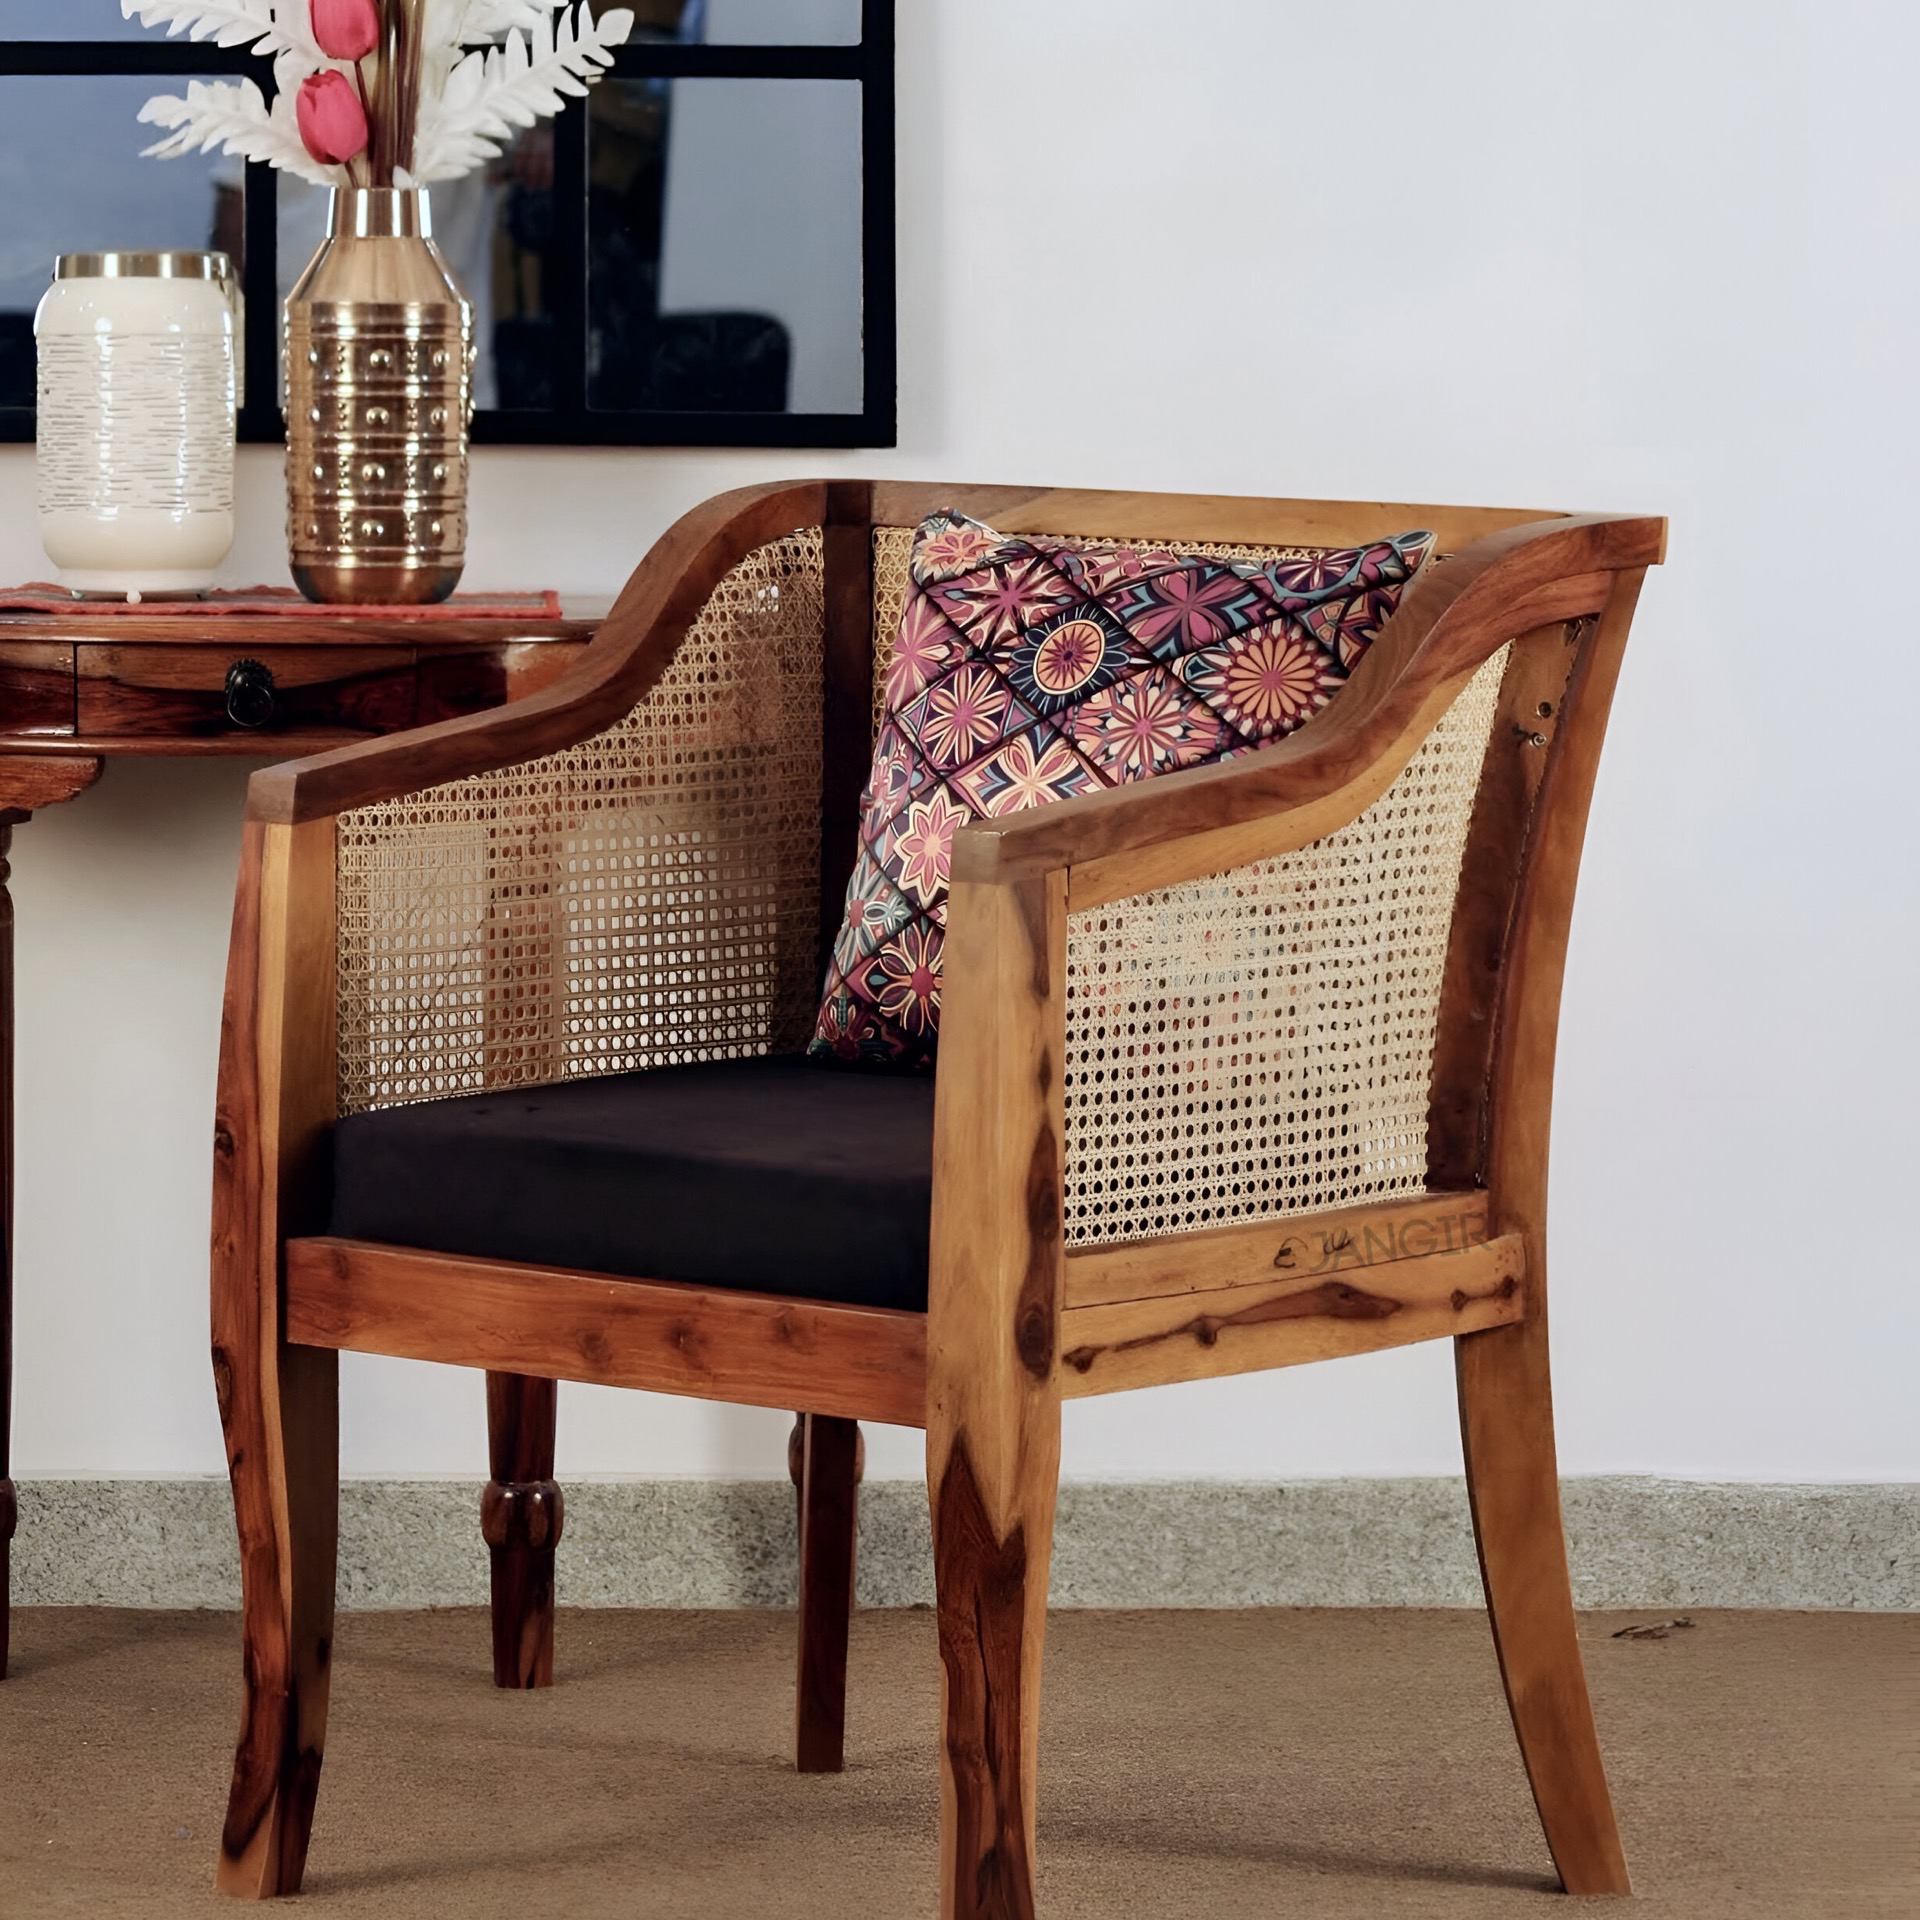 Discover the charm of natural wicker craftsmanship in our elegant cane chairs for living room, made with sheesham wood. Enjoy unmatched comfort and style for a timeless addition to your home decor!